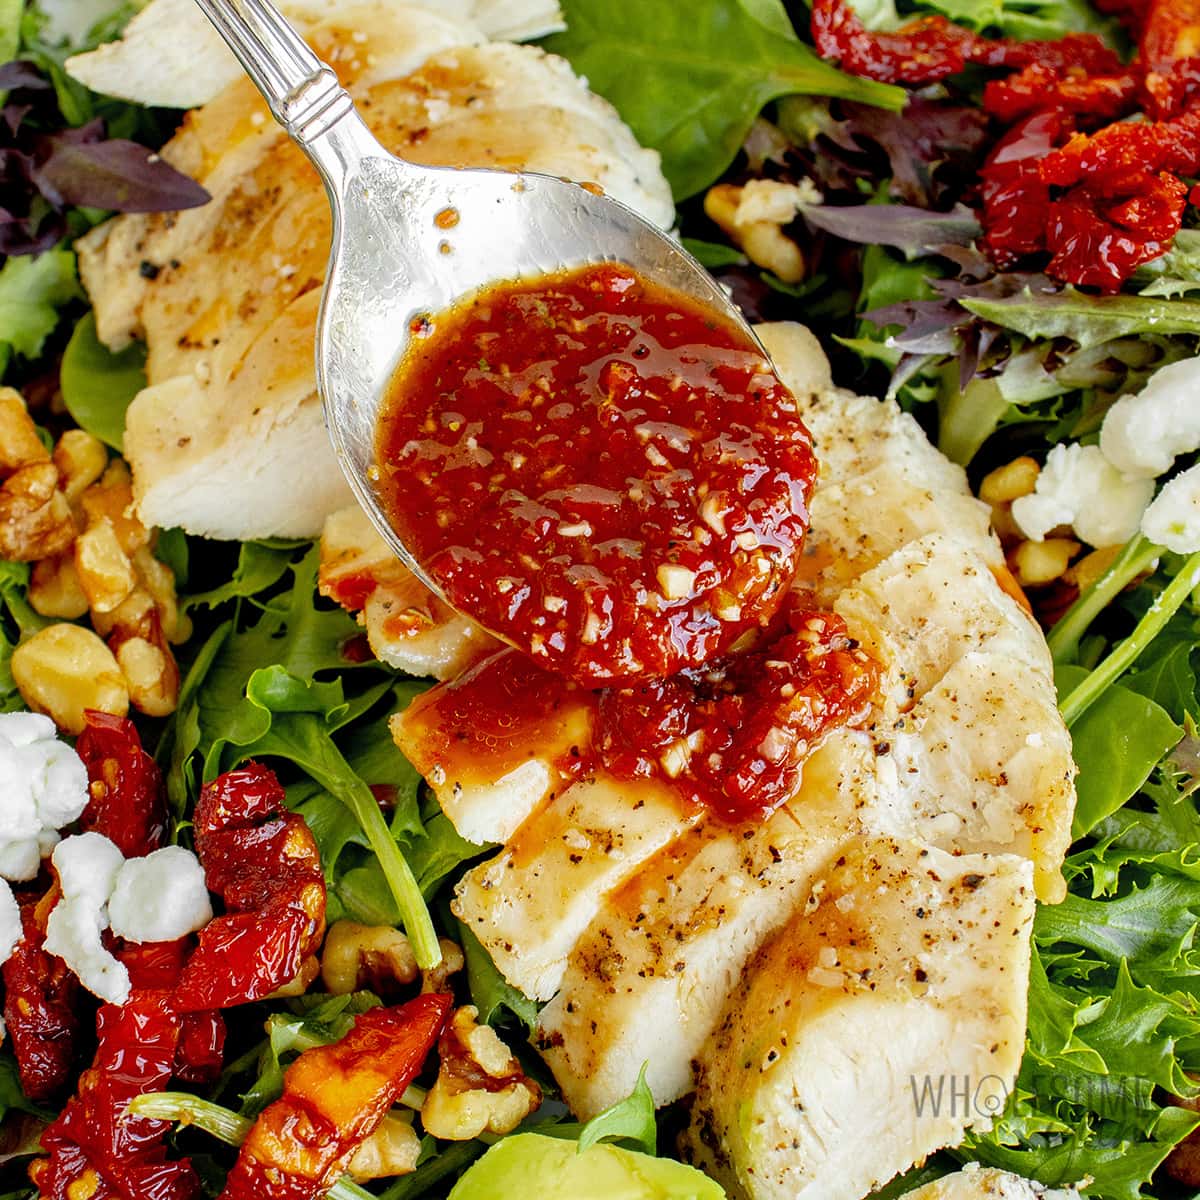 Dressing drizzled over salad. 